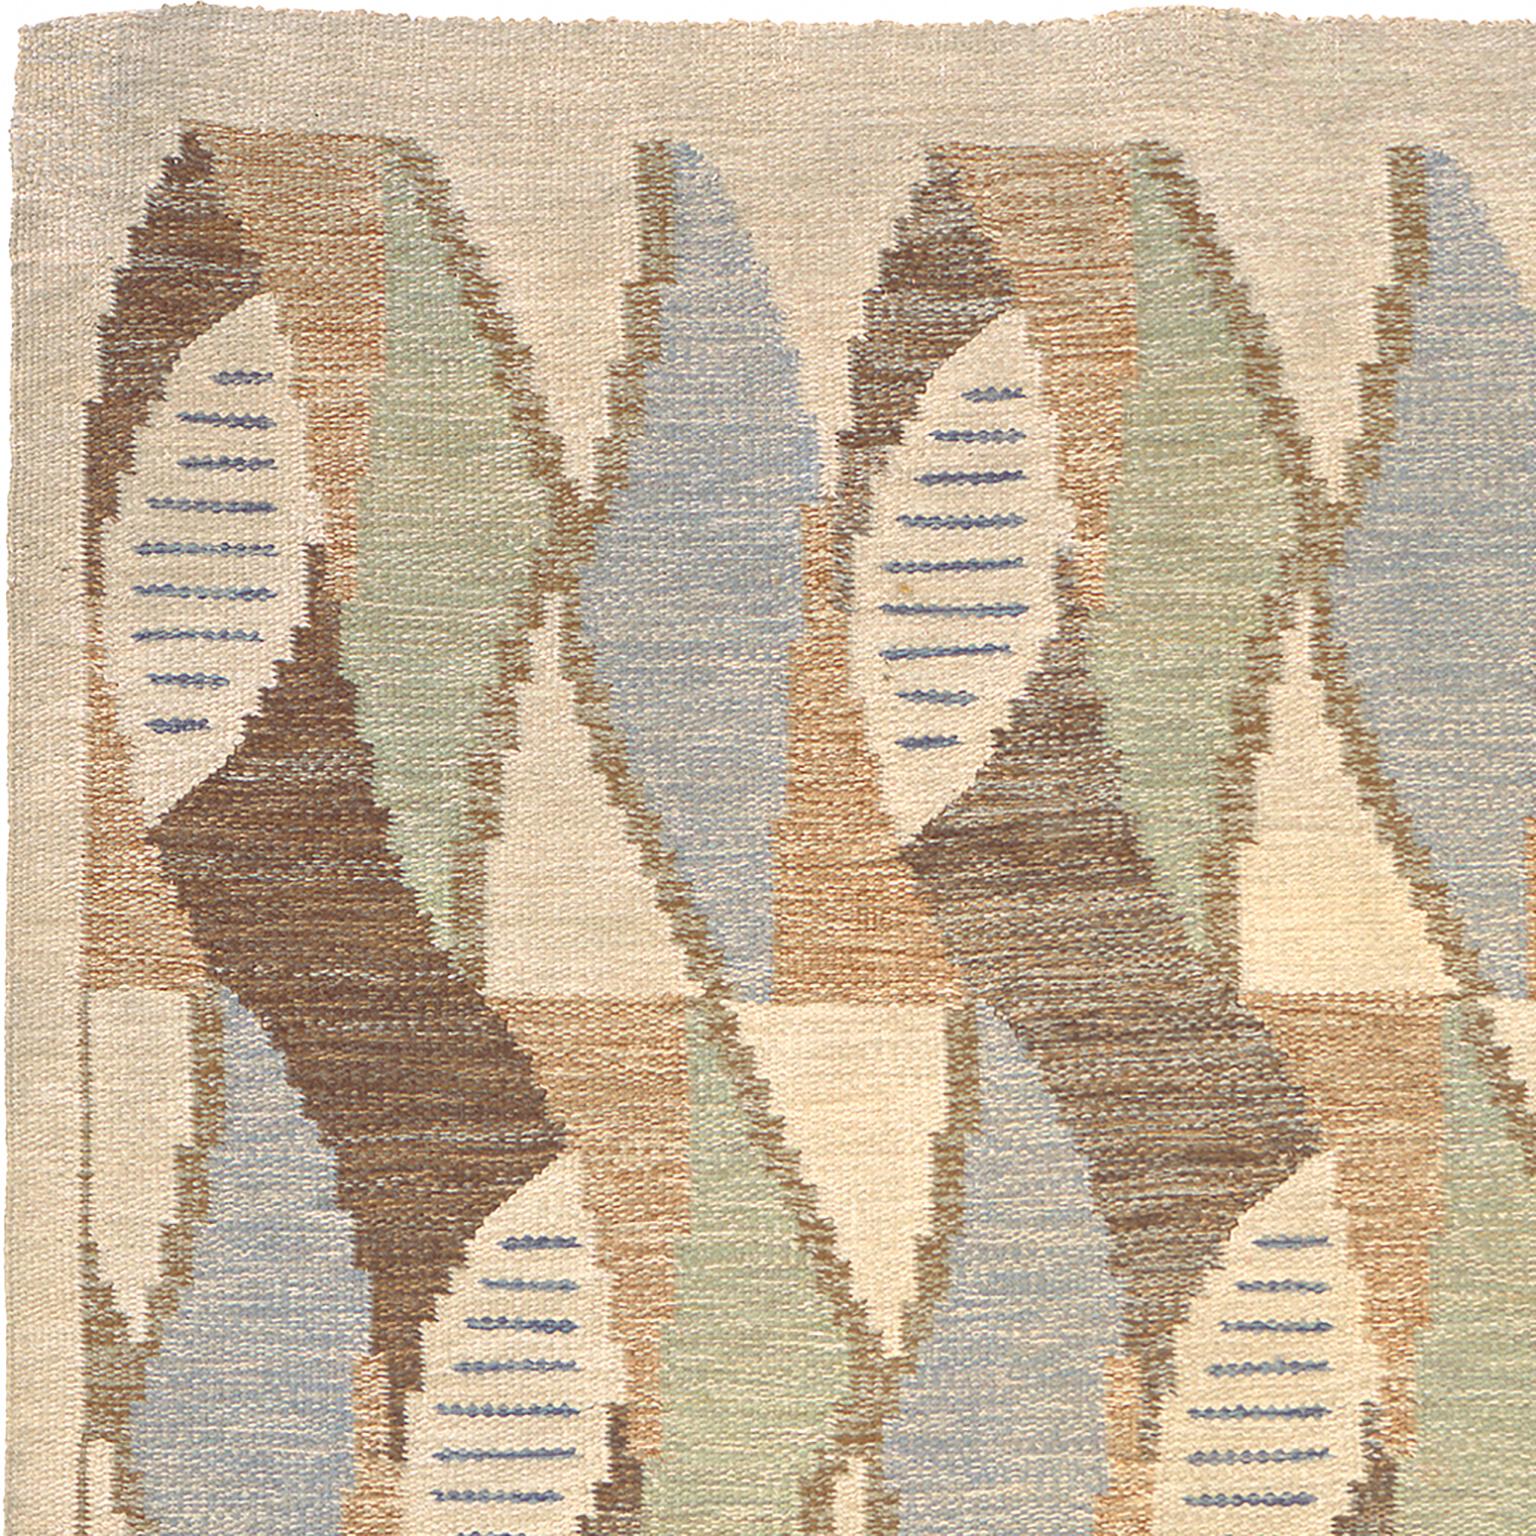 Hand-Woven Mid-20th Century Swedish Flat-Weave Rug by Brita Grahn For Sale